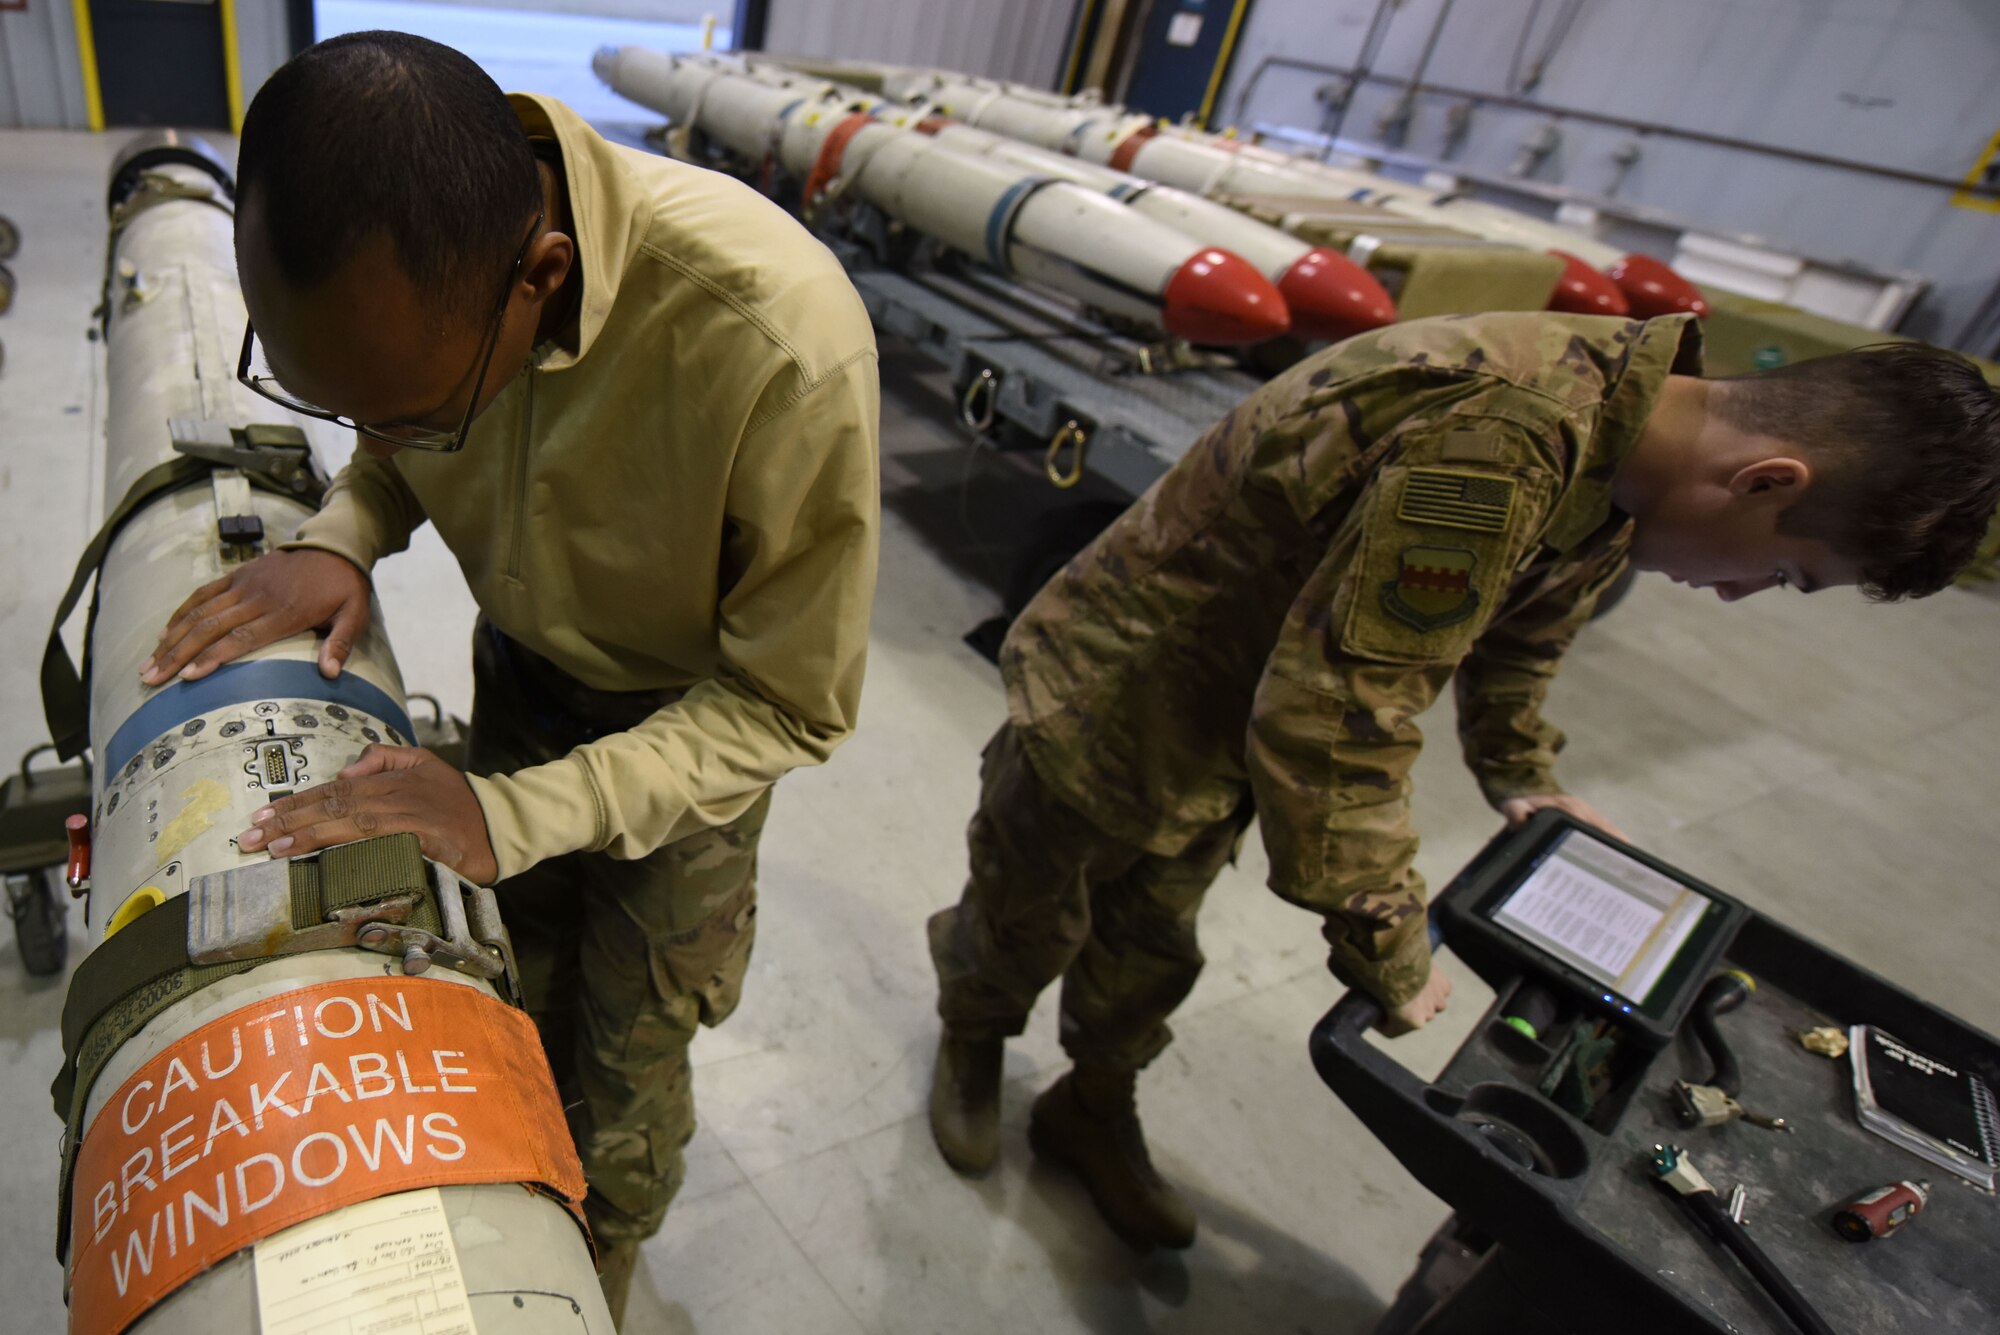 U.S. Air Force Senior Airman Larry Wallace, left, and Senior Airman Allen Jenlink, right, 20th Equipment Maintenance Squadron precision guidance munitions crew chiefs, work together to replace a cable on an AGM-88 missile at Shaw Air Force Base, S.C., Nov. 30, 2018.